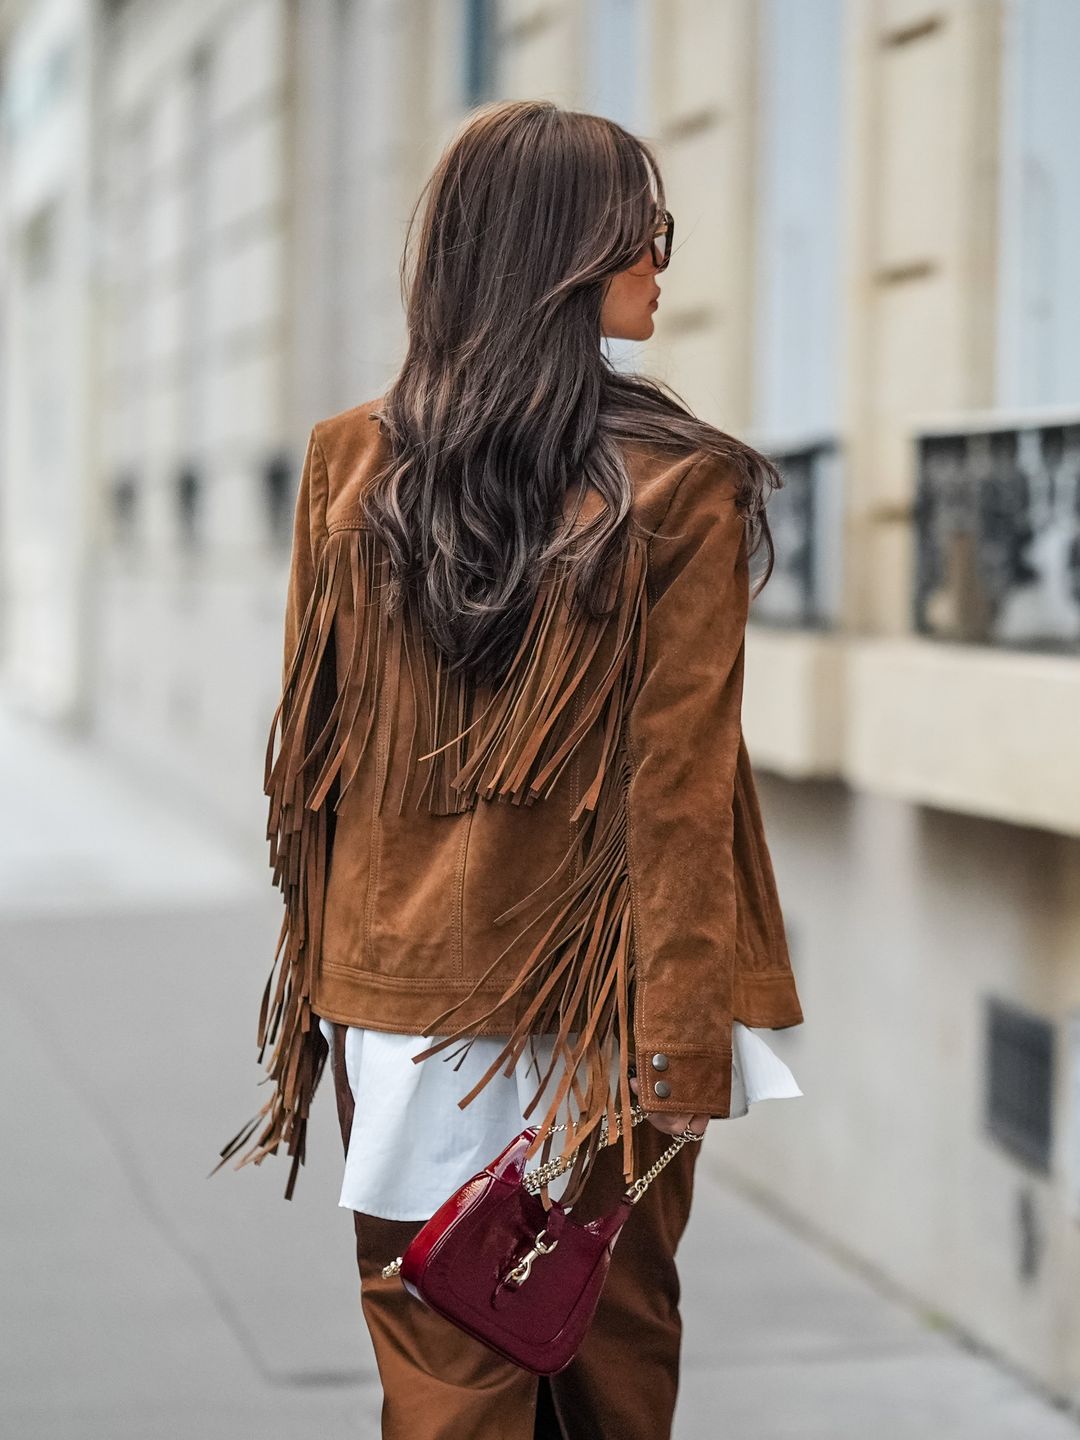 Heart Evangelista dons a YSL suede fringed jacket and we can't get enough of it